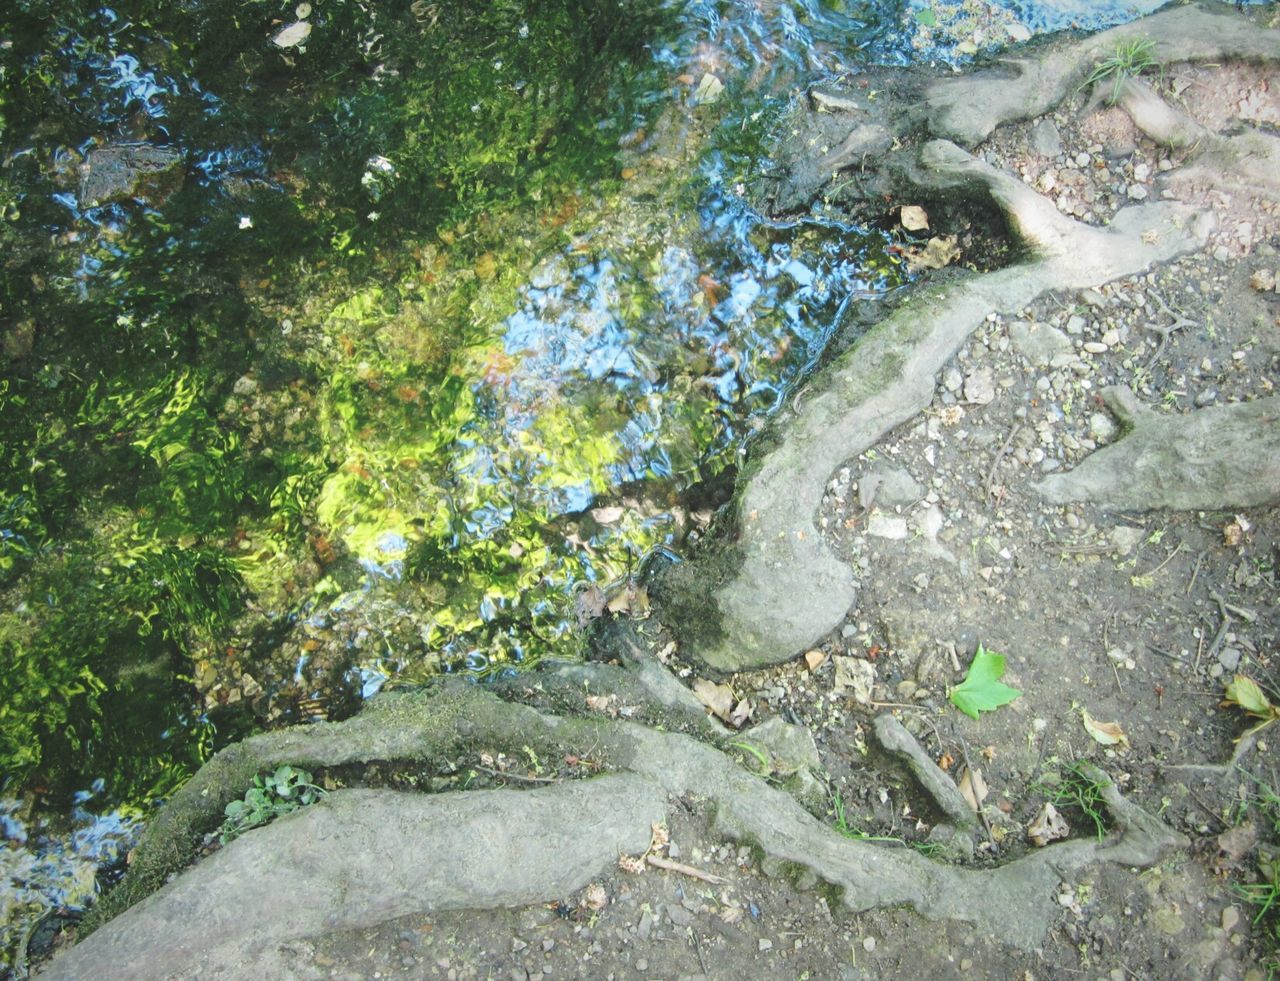 CLOSE-UP OF ROCK BY TREES